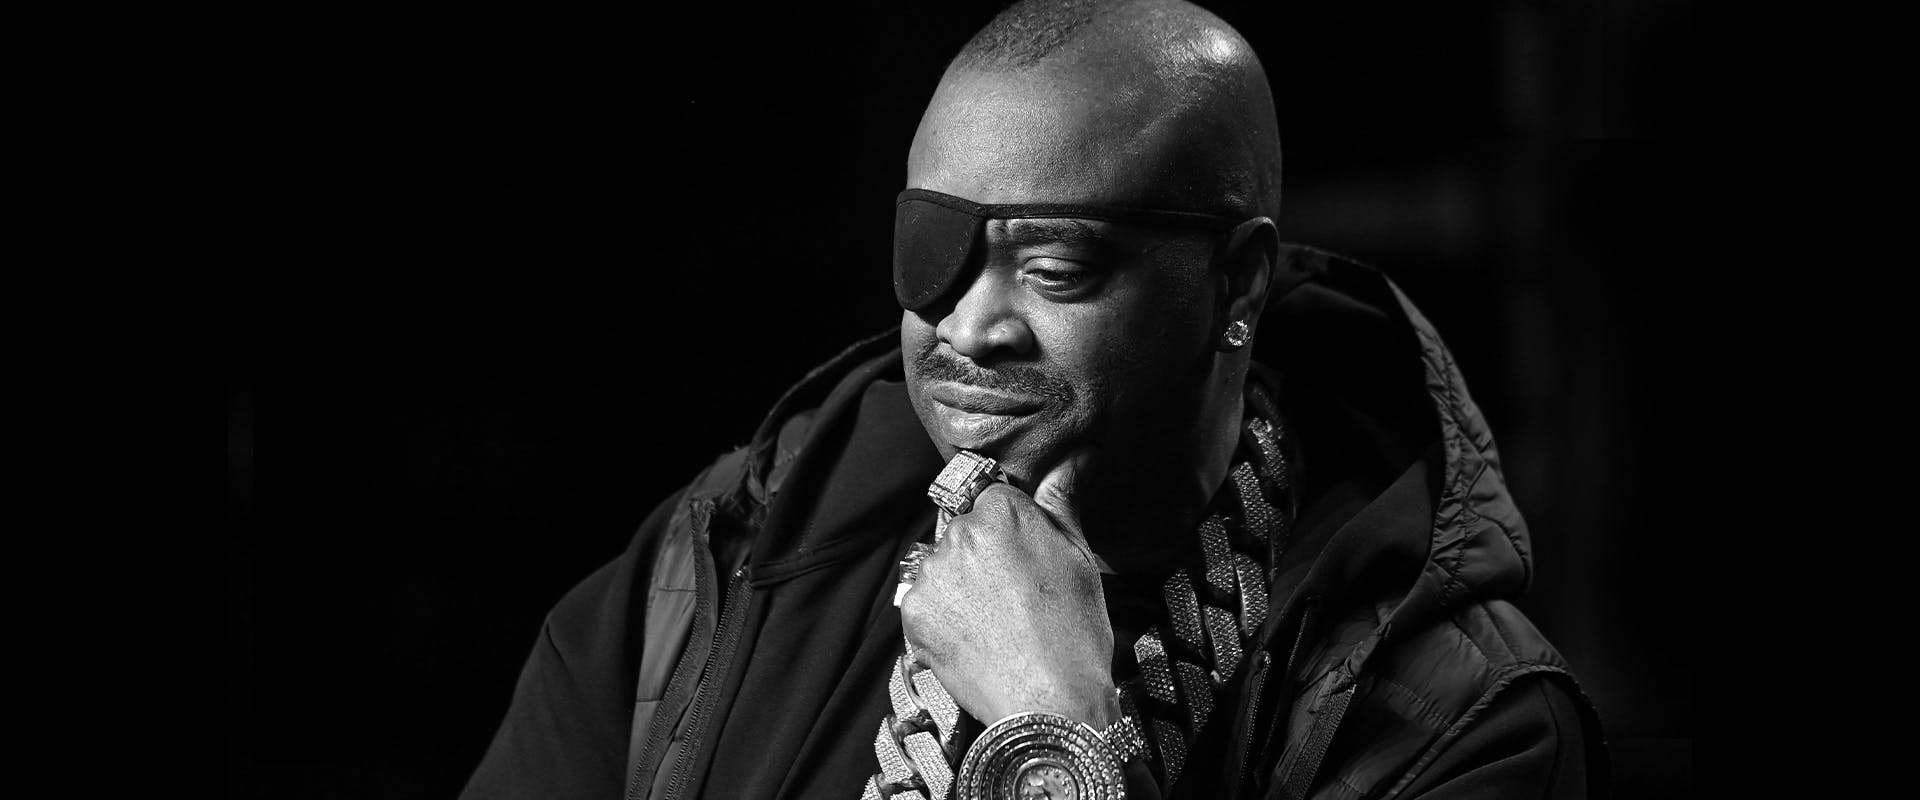 ATLANTA, GEORGIA - NOVEMBER 12: (EDITORS NOTE: Image has been converted to black and white.) Rapper Slick Rick onstage at the 2021 REVOLT Summit at 787 Windsor on November 12, 2021 in Atlanta, Georgia.